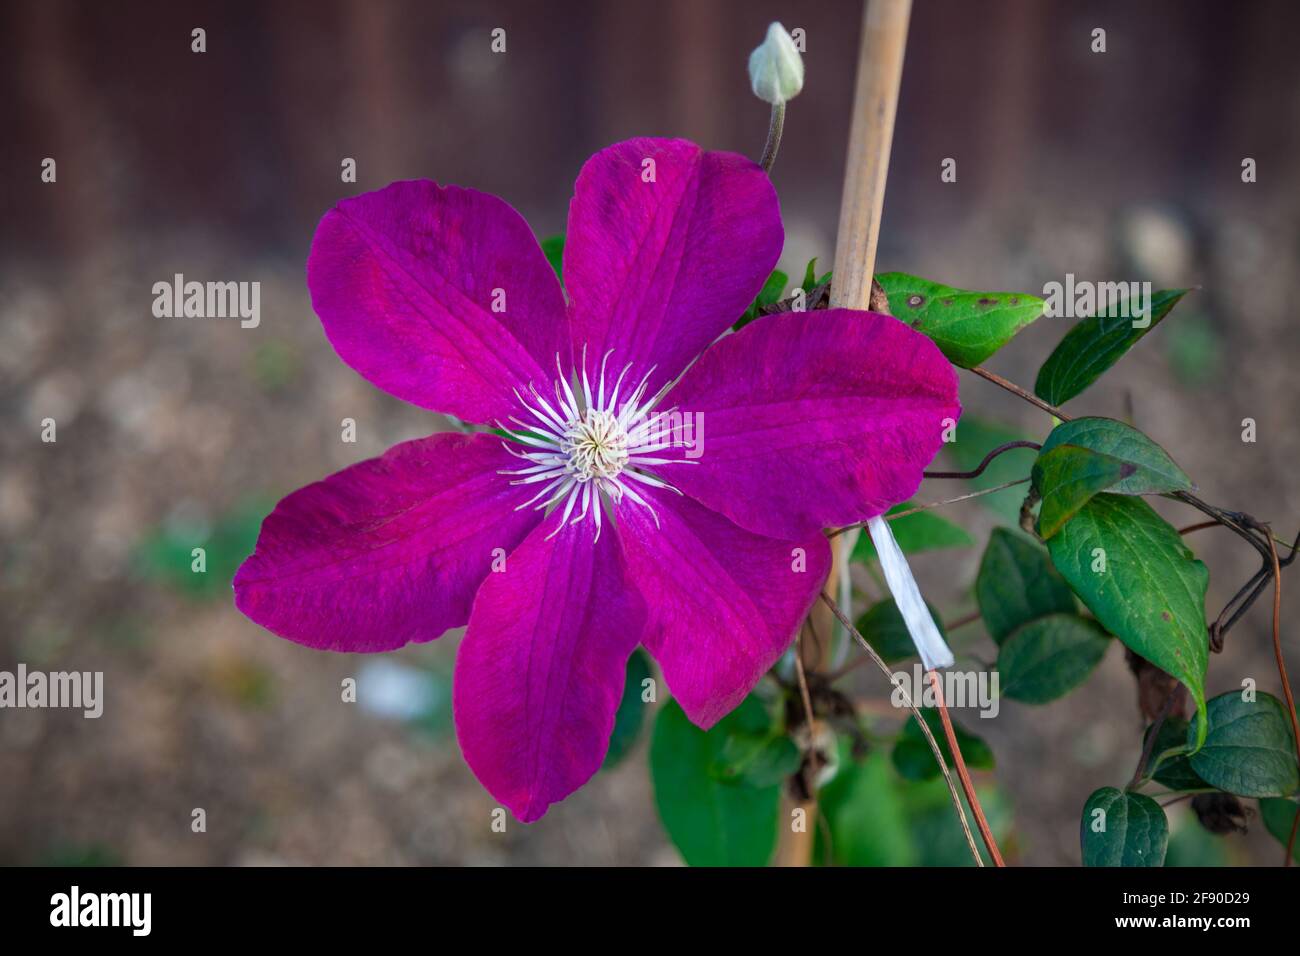 Large lilac clematis flower on a blurred background Stock Photo